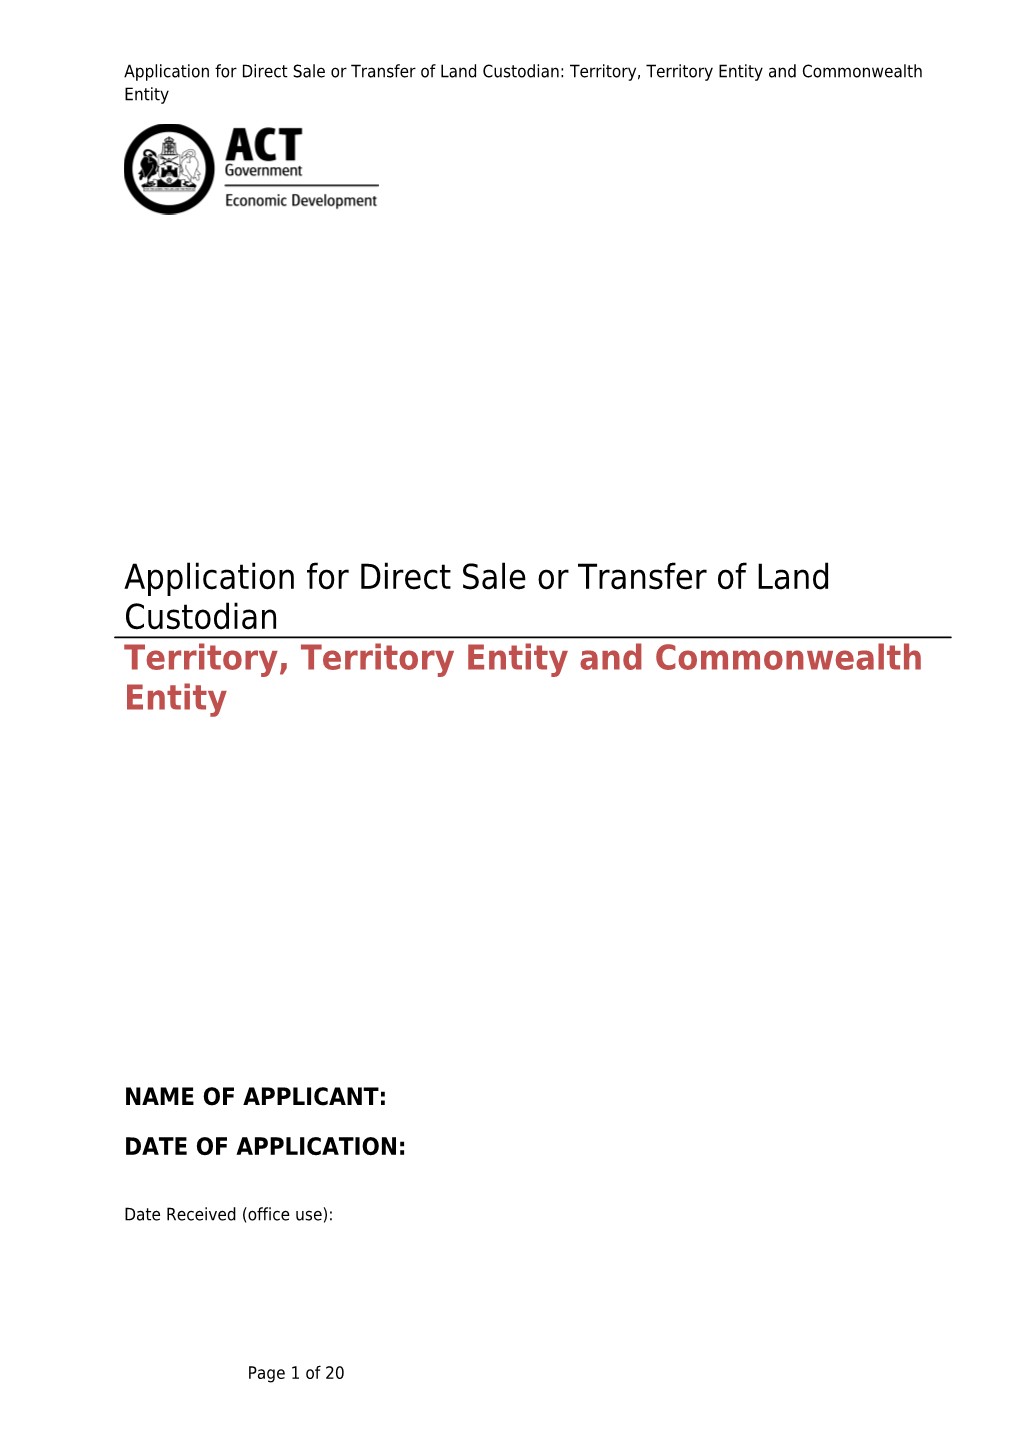 Government Direct Sale Application